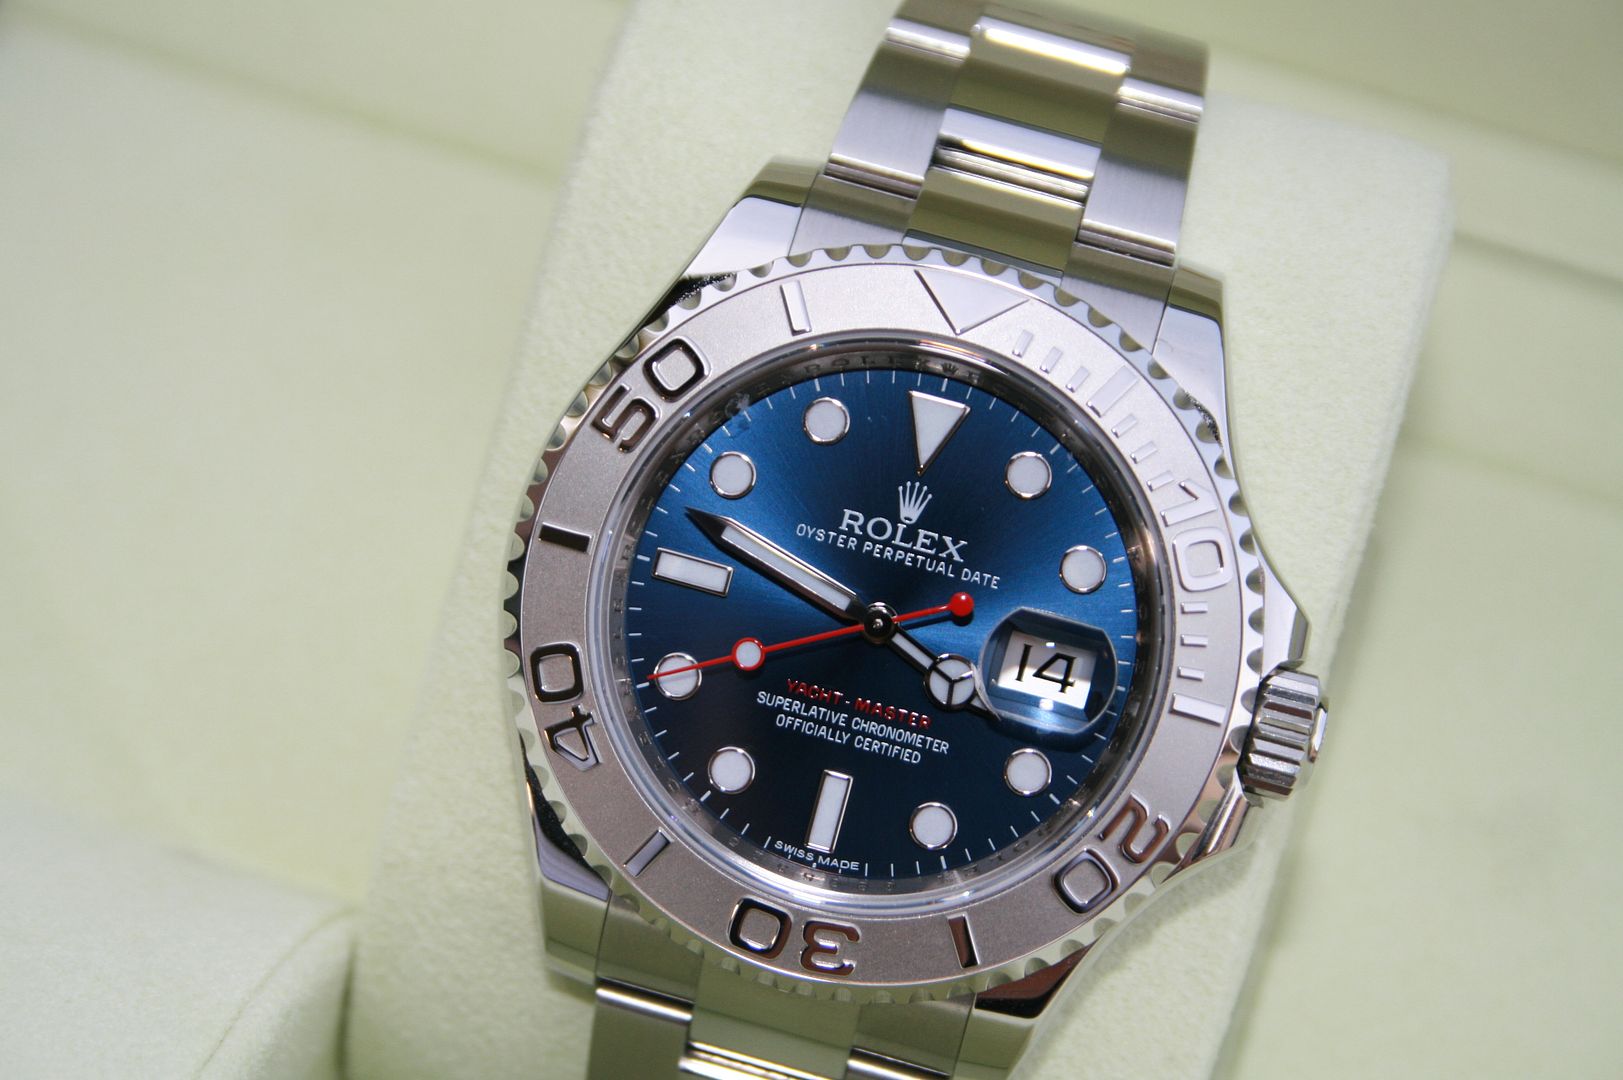 FS: Rolex 116622 Blue Dial Yachtmaster New Model Priced to SELL - Rolex ...